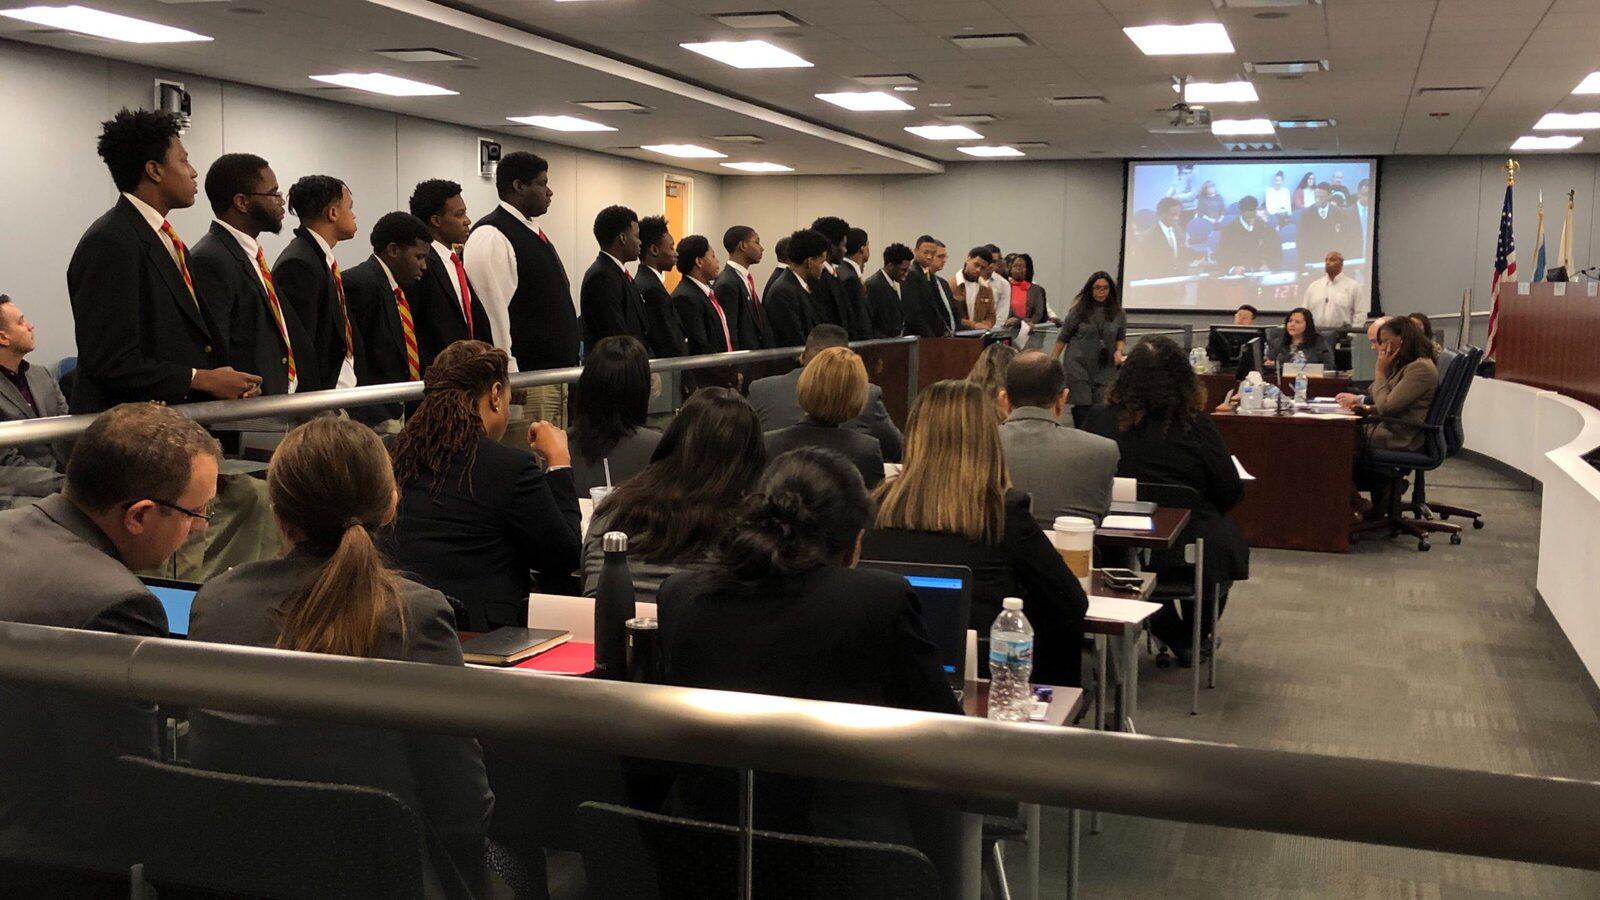 Urban Prep students attended the Chicago Board of Education meeting on Wednesday Jan. 22, 2020, to speak in support of their school.